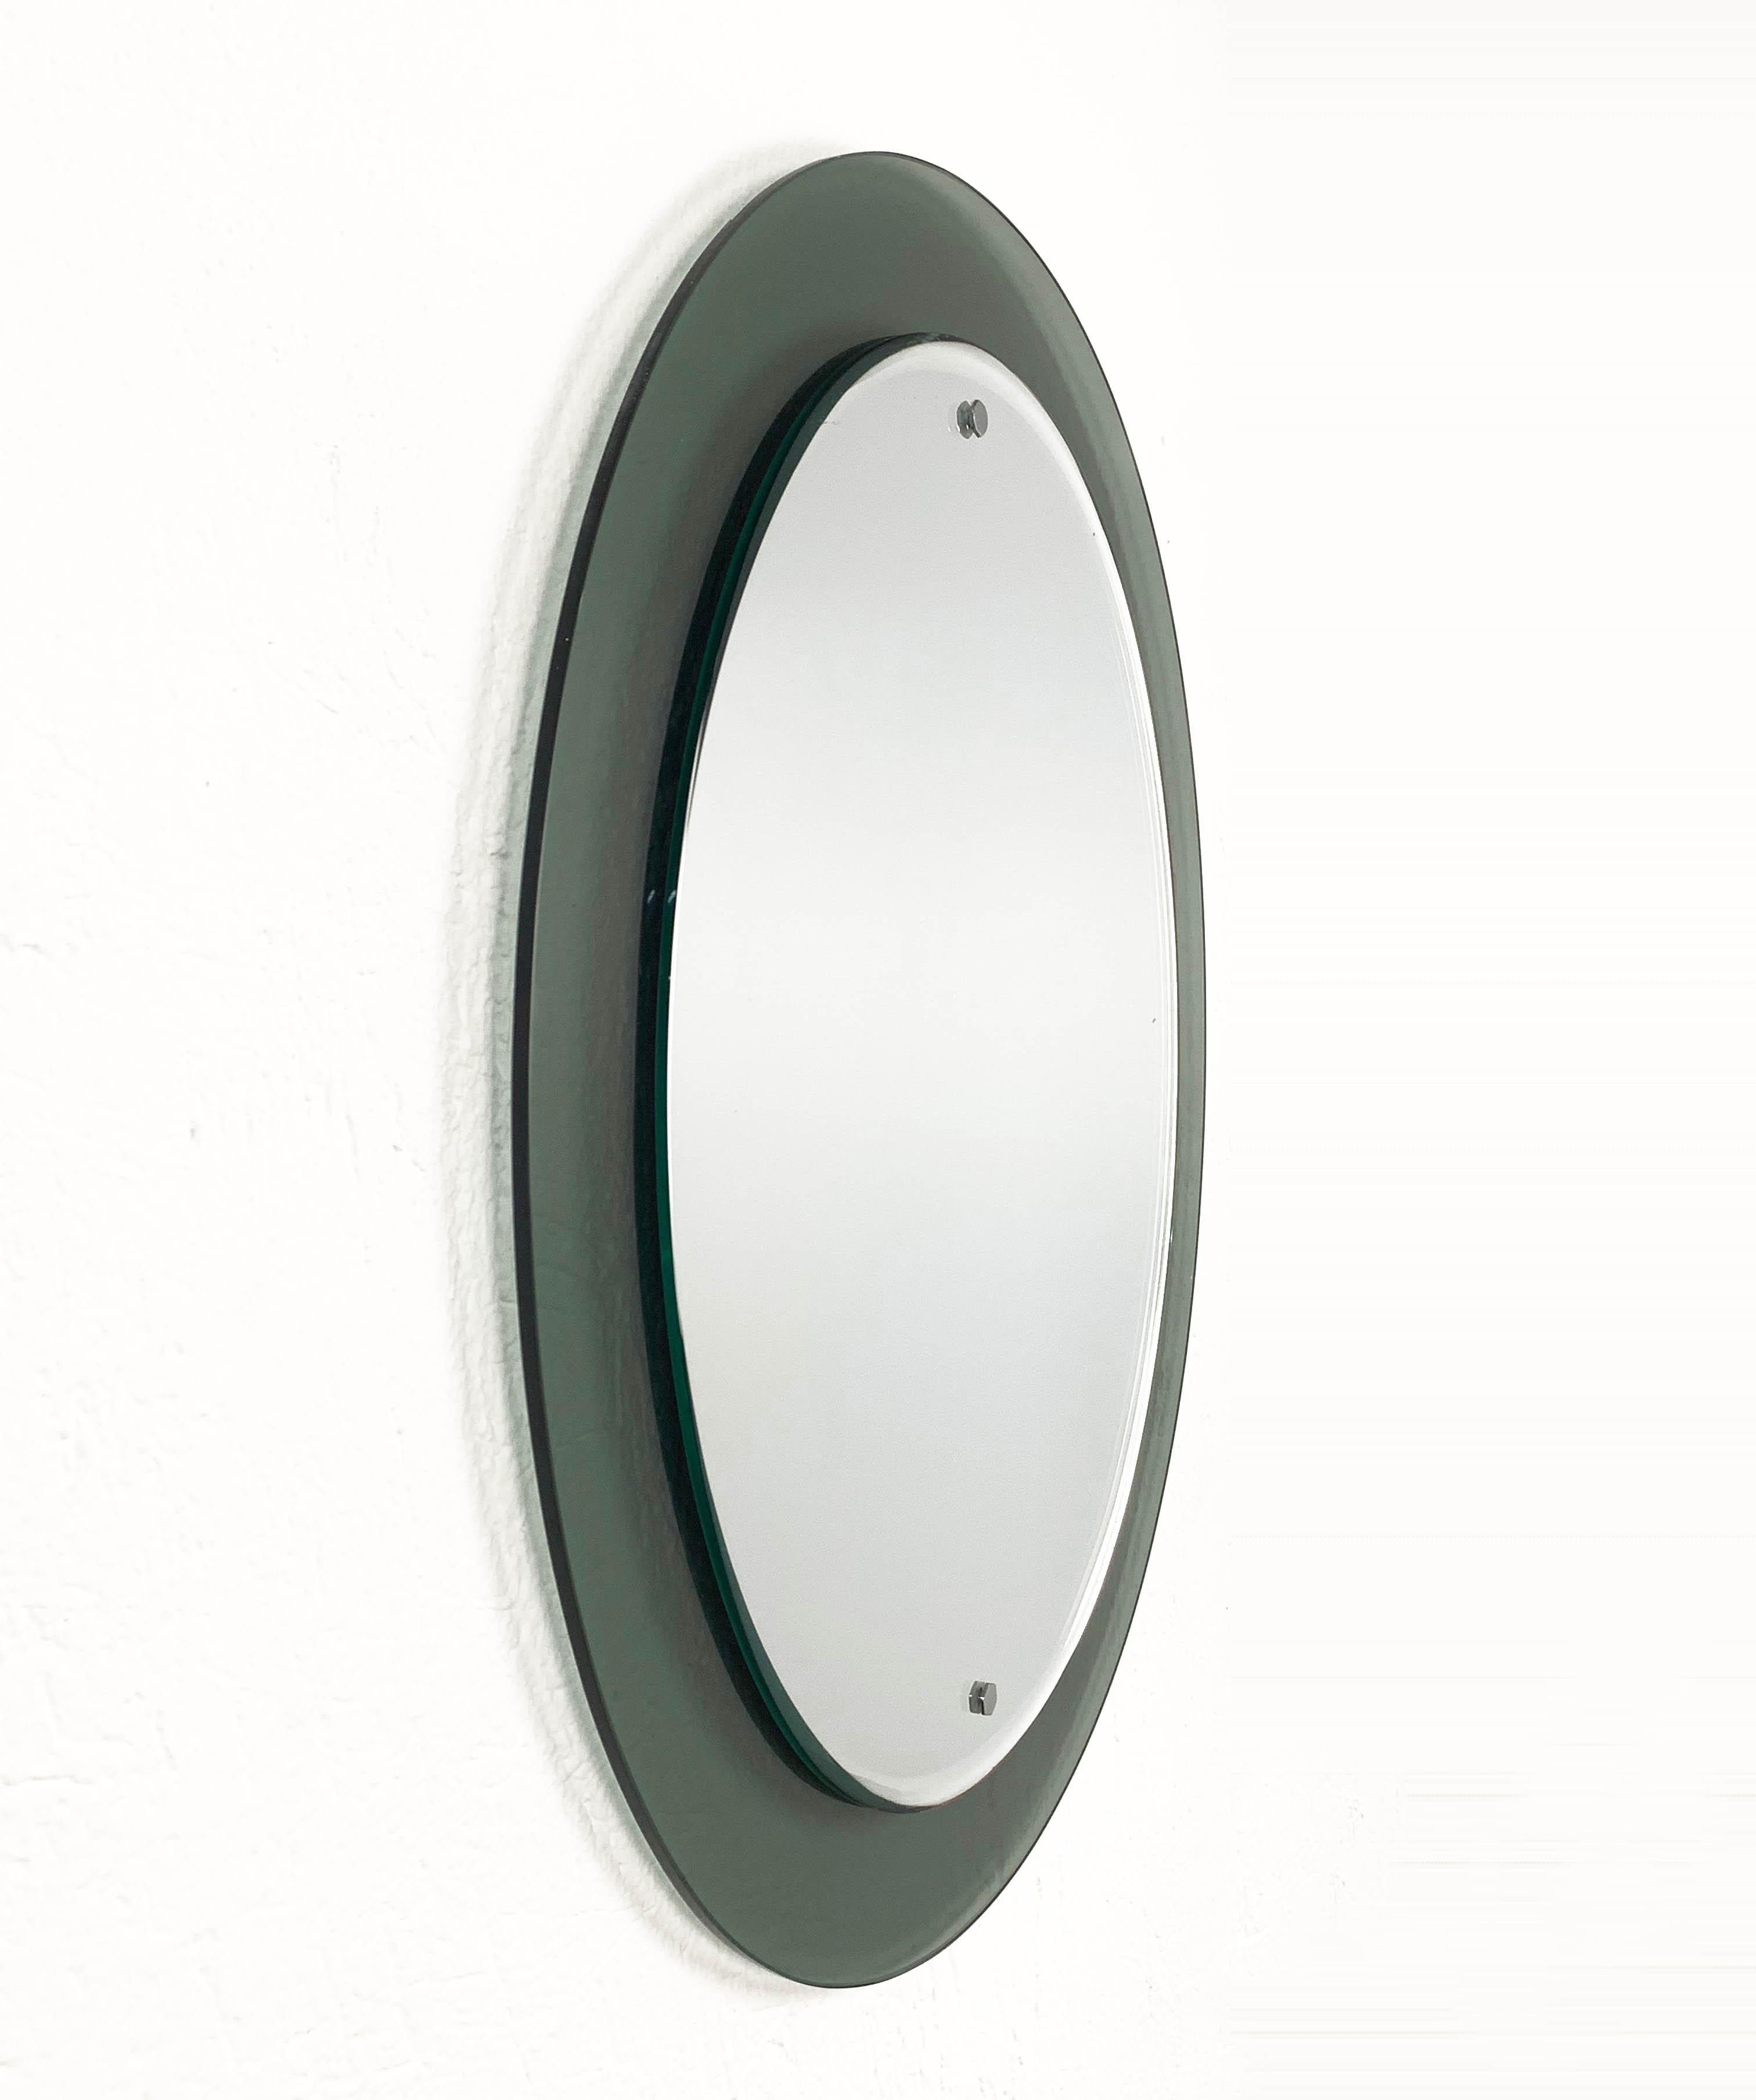 Italian Midcentury Oval Wall Glass Framed Mirror Attributed to Cristal Art, Italy, 1960s